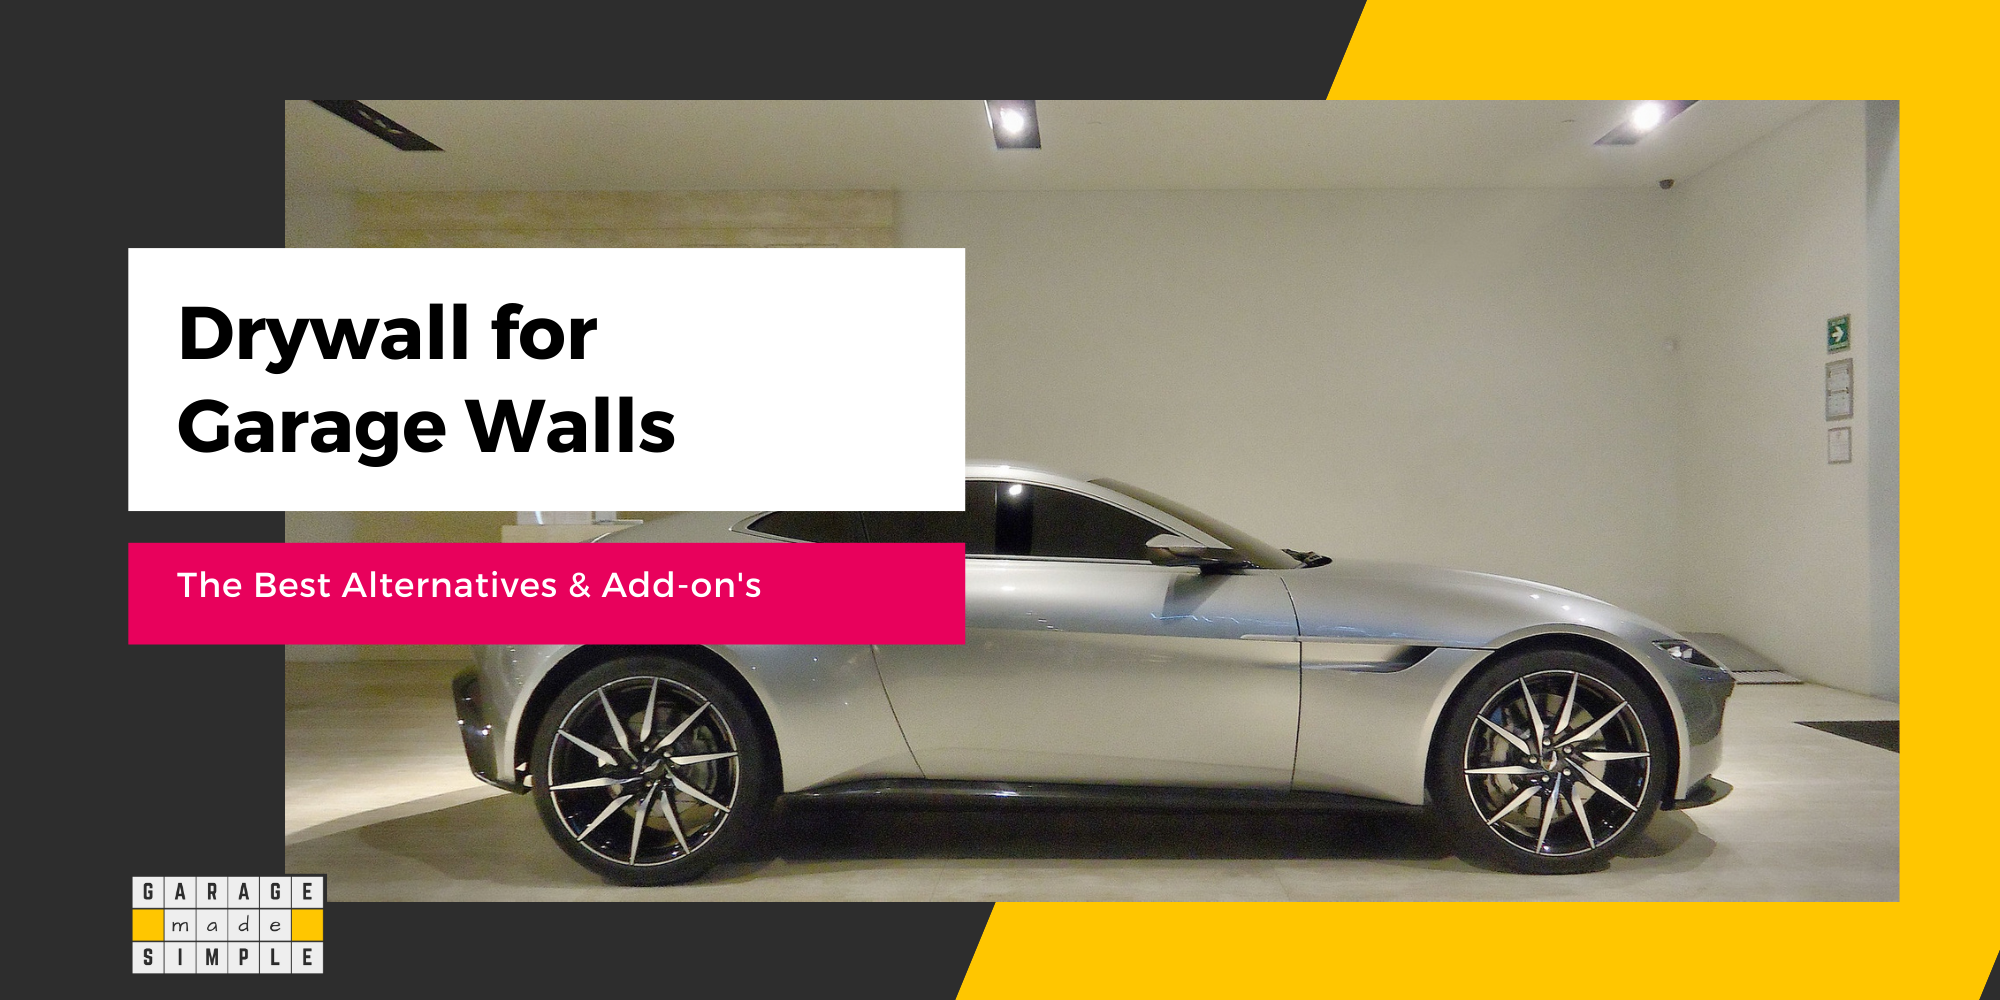 9 Alternatives To Drywall Garage Walls: What is Practical & Best?